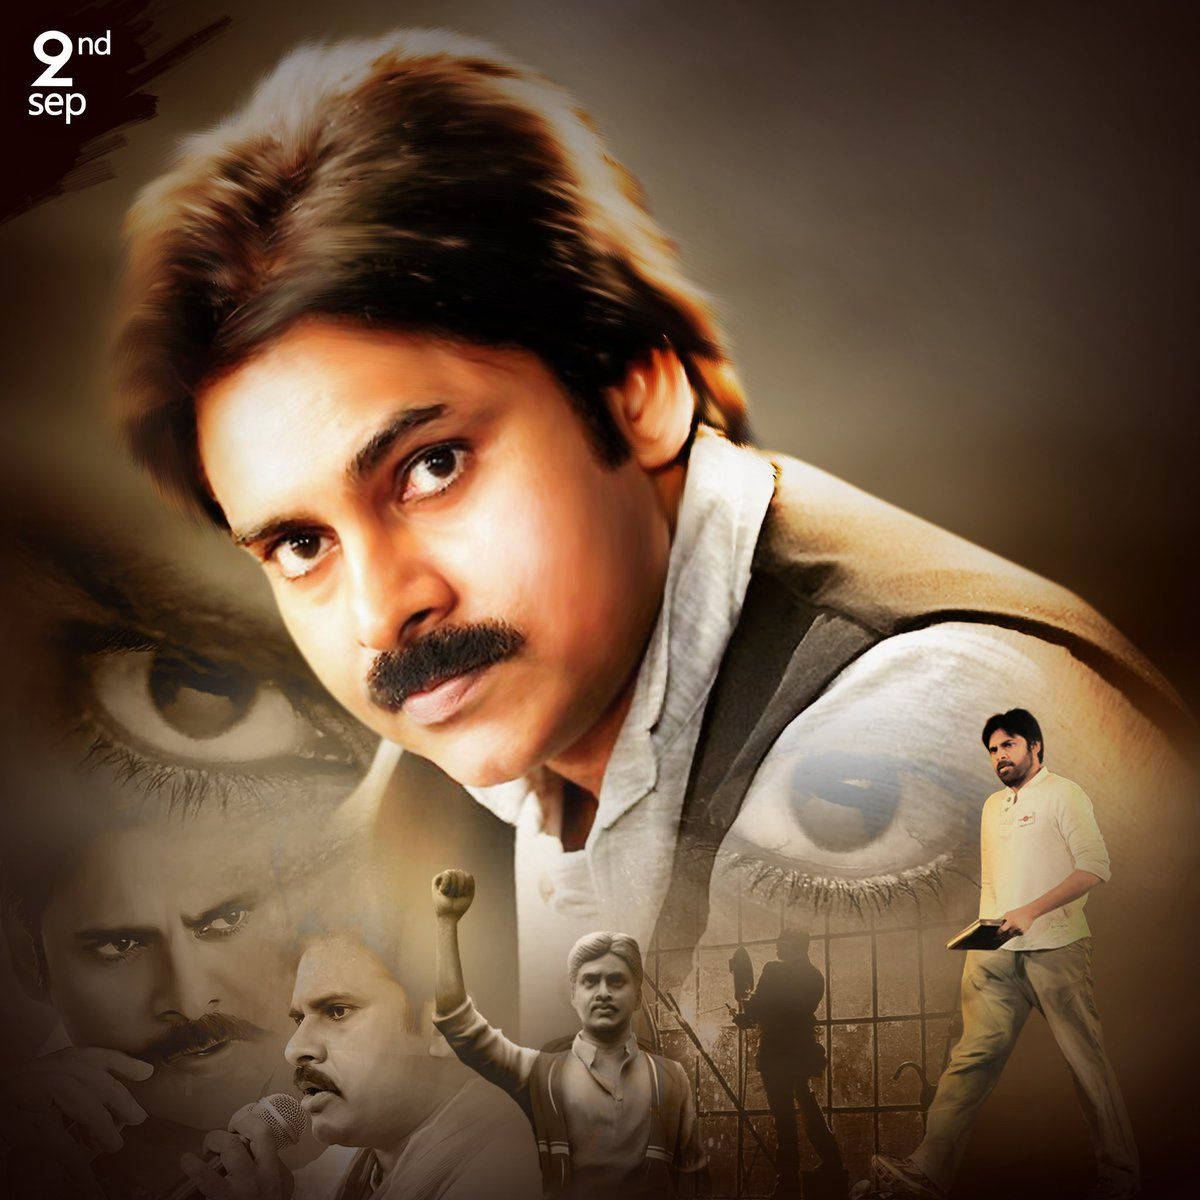 Pspk Collage Of Photos And Statues